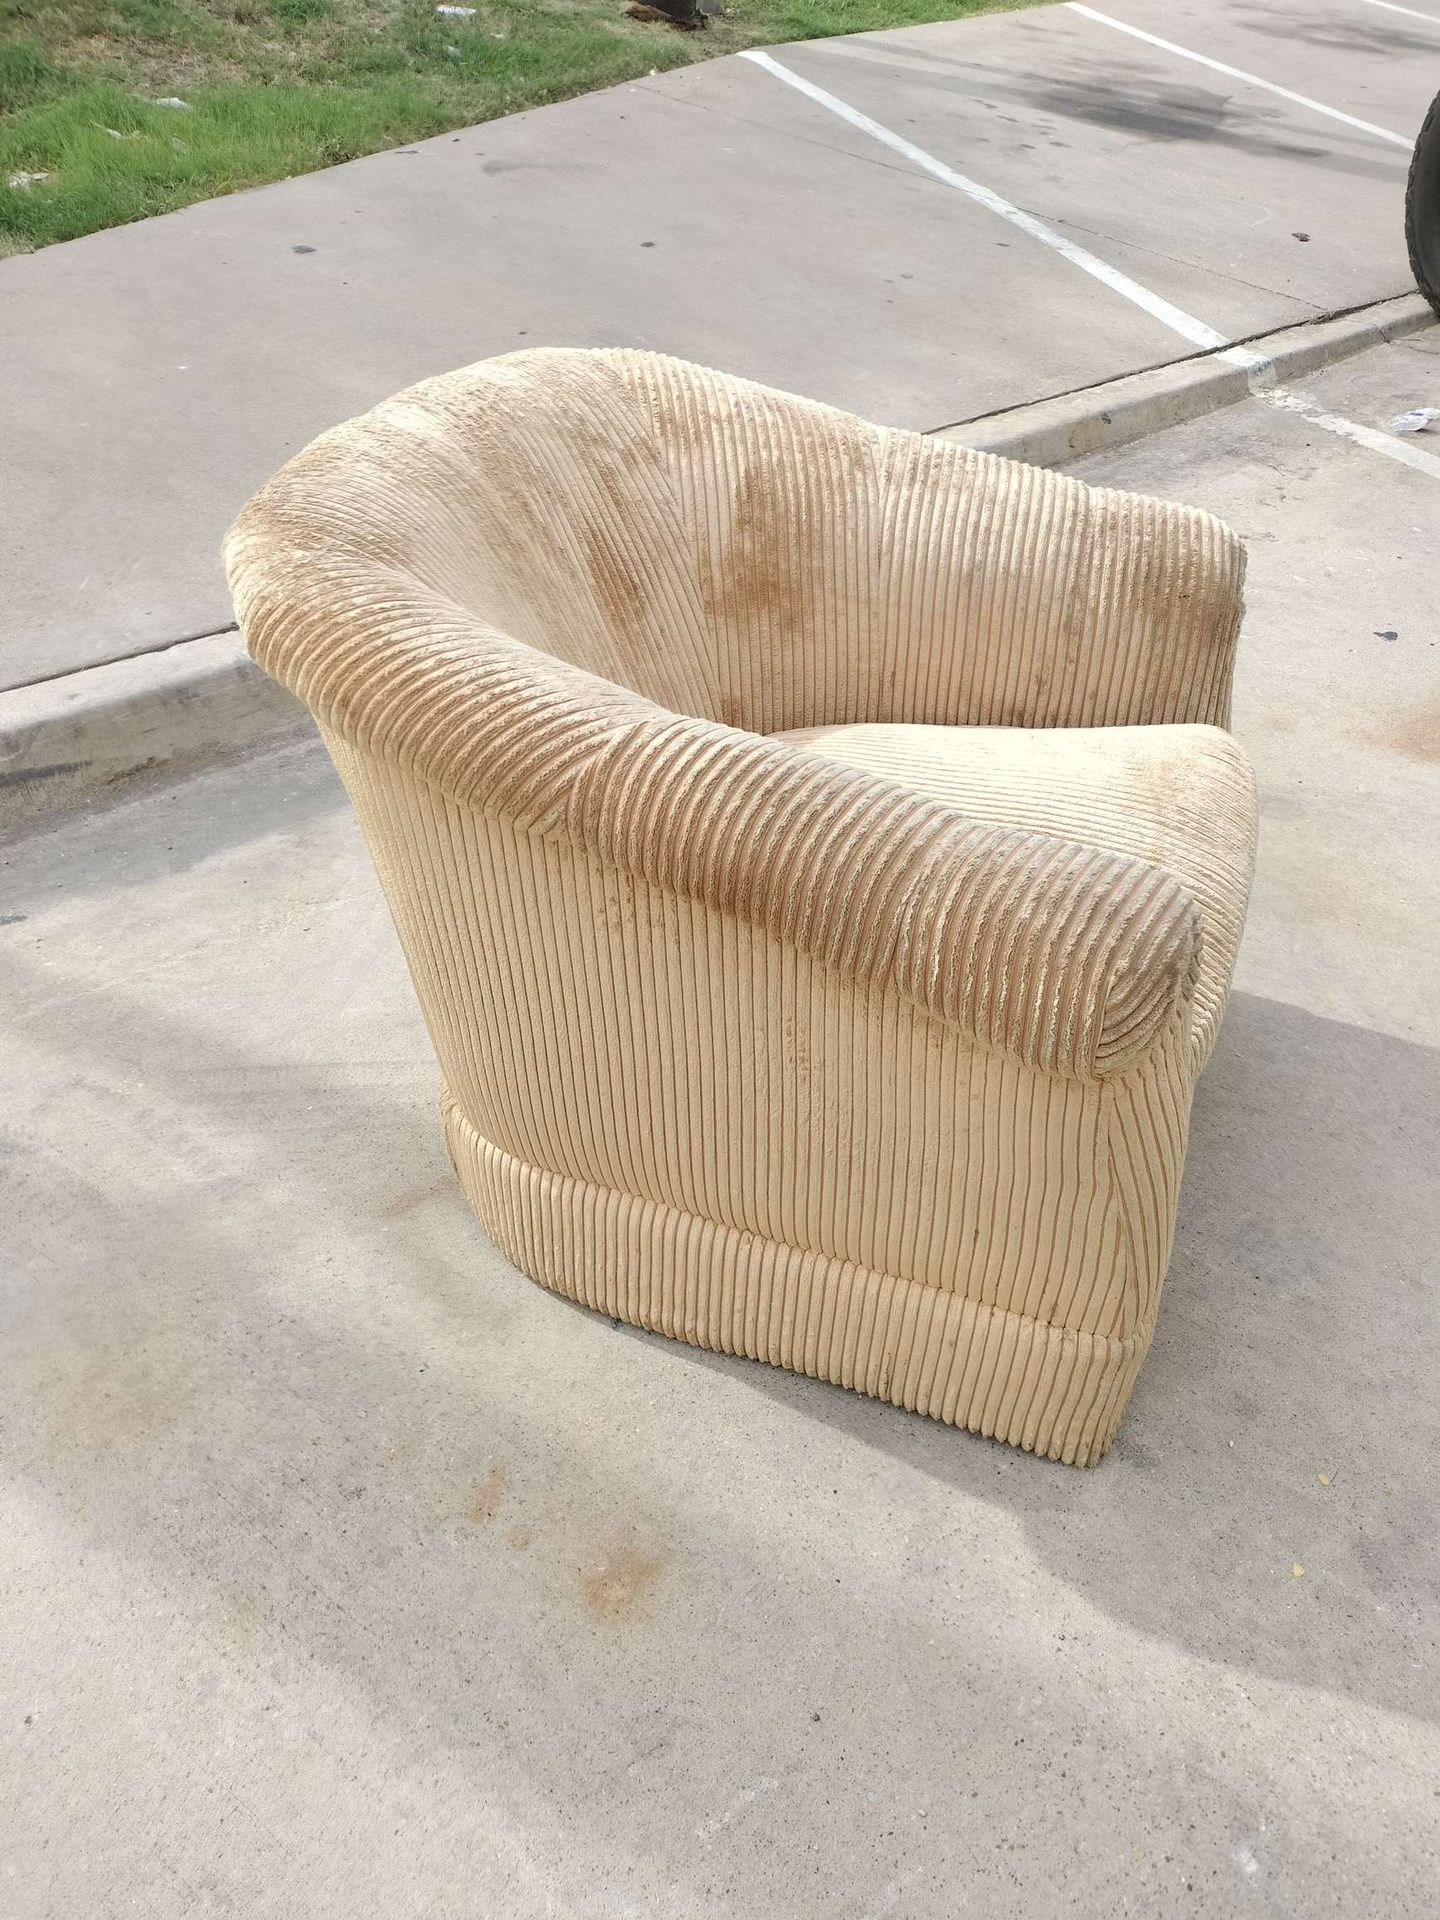 Sitting Chair That Rocks And Spins 